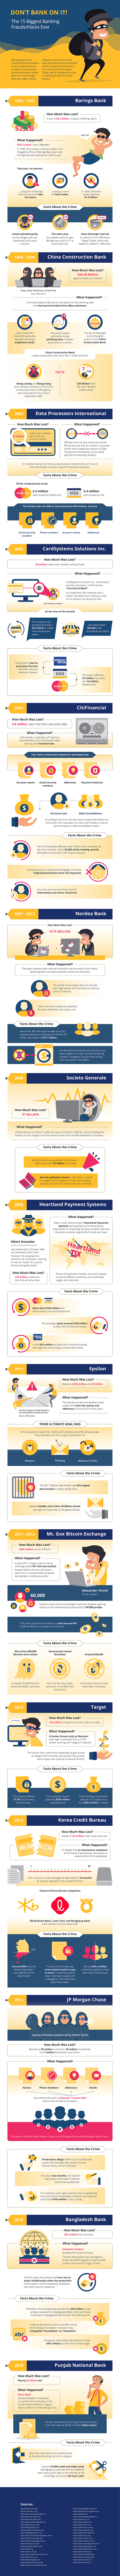 Banking Frauds and Hacks - Fortunly Infographic